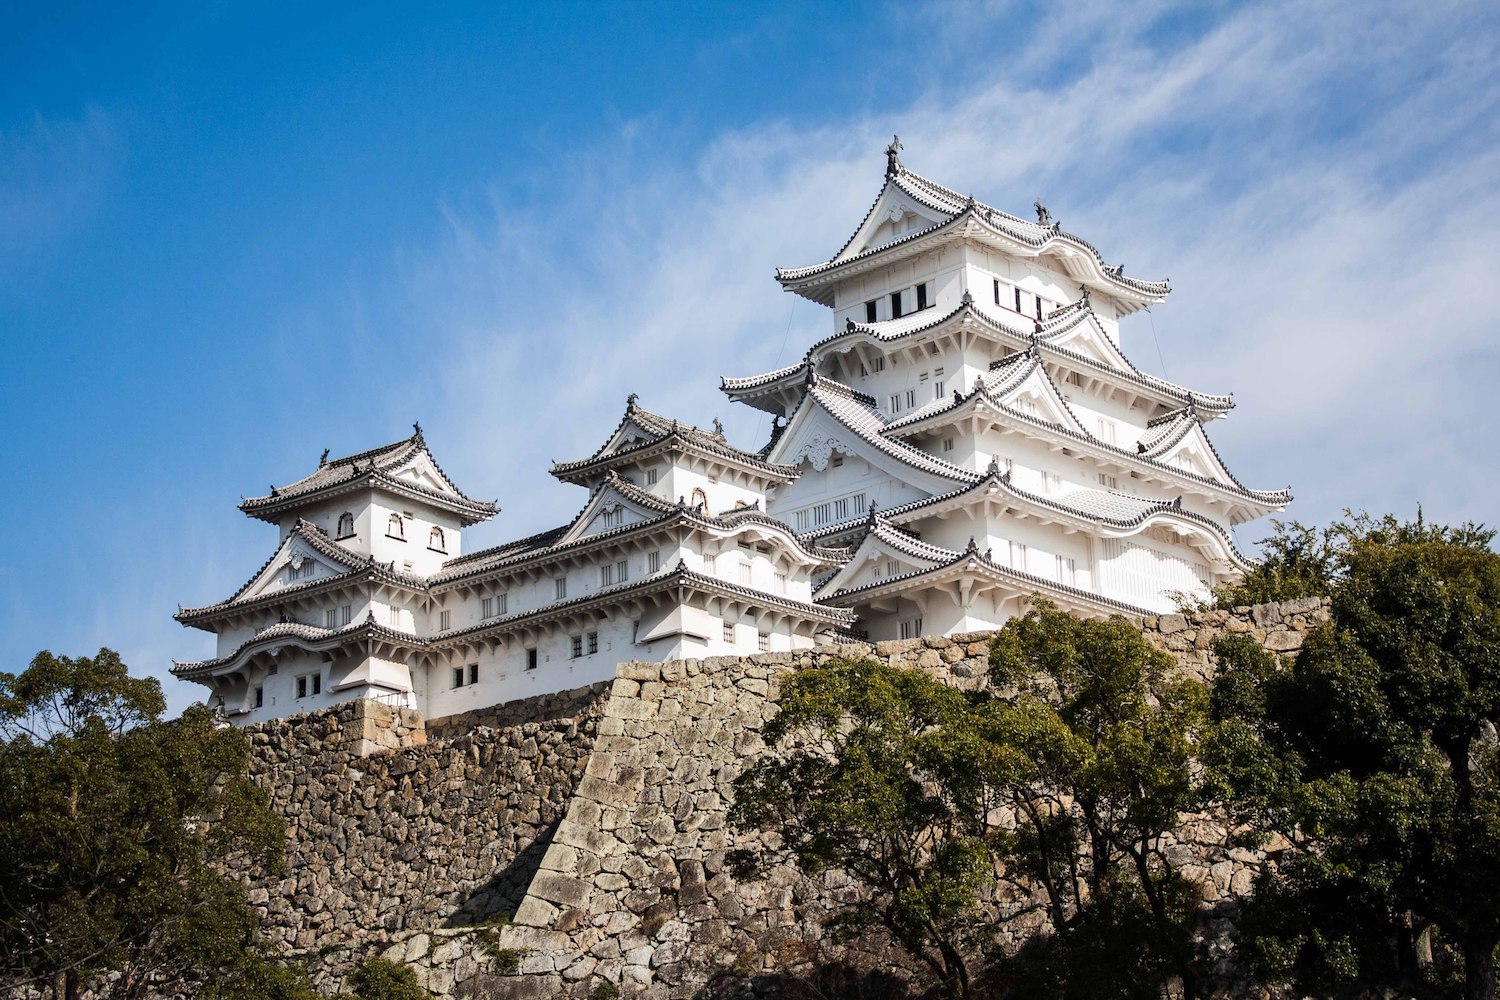 Himeji Castle, also called the white Heron castle, Japan. This is a UNESCO world heritage site